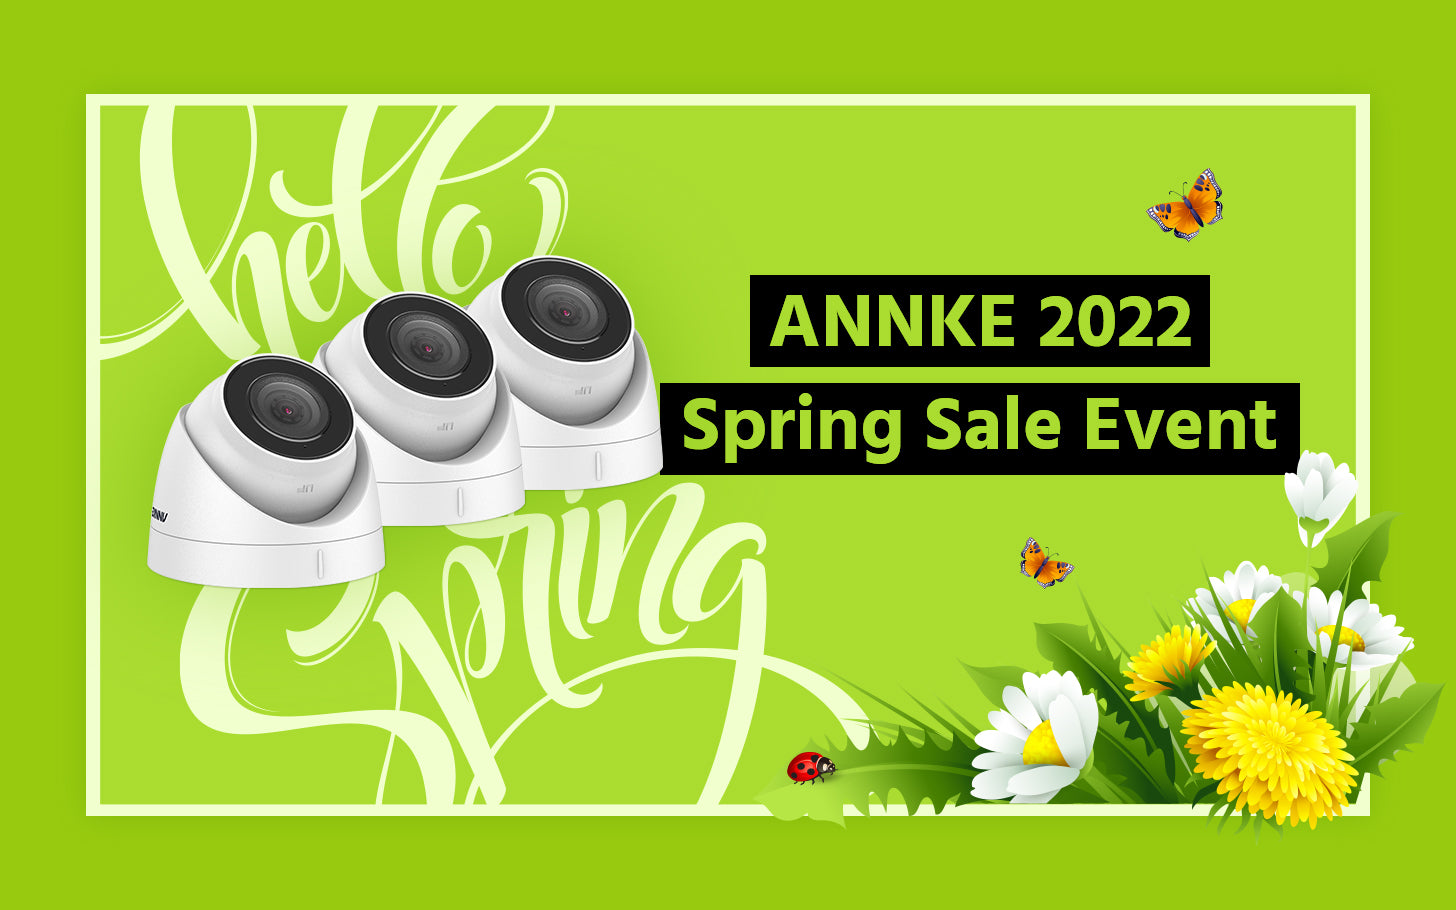 annke security camera system deals